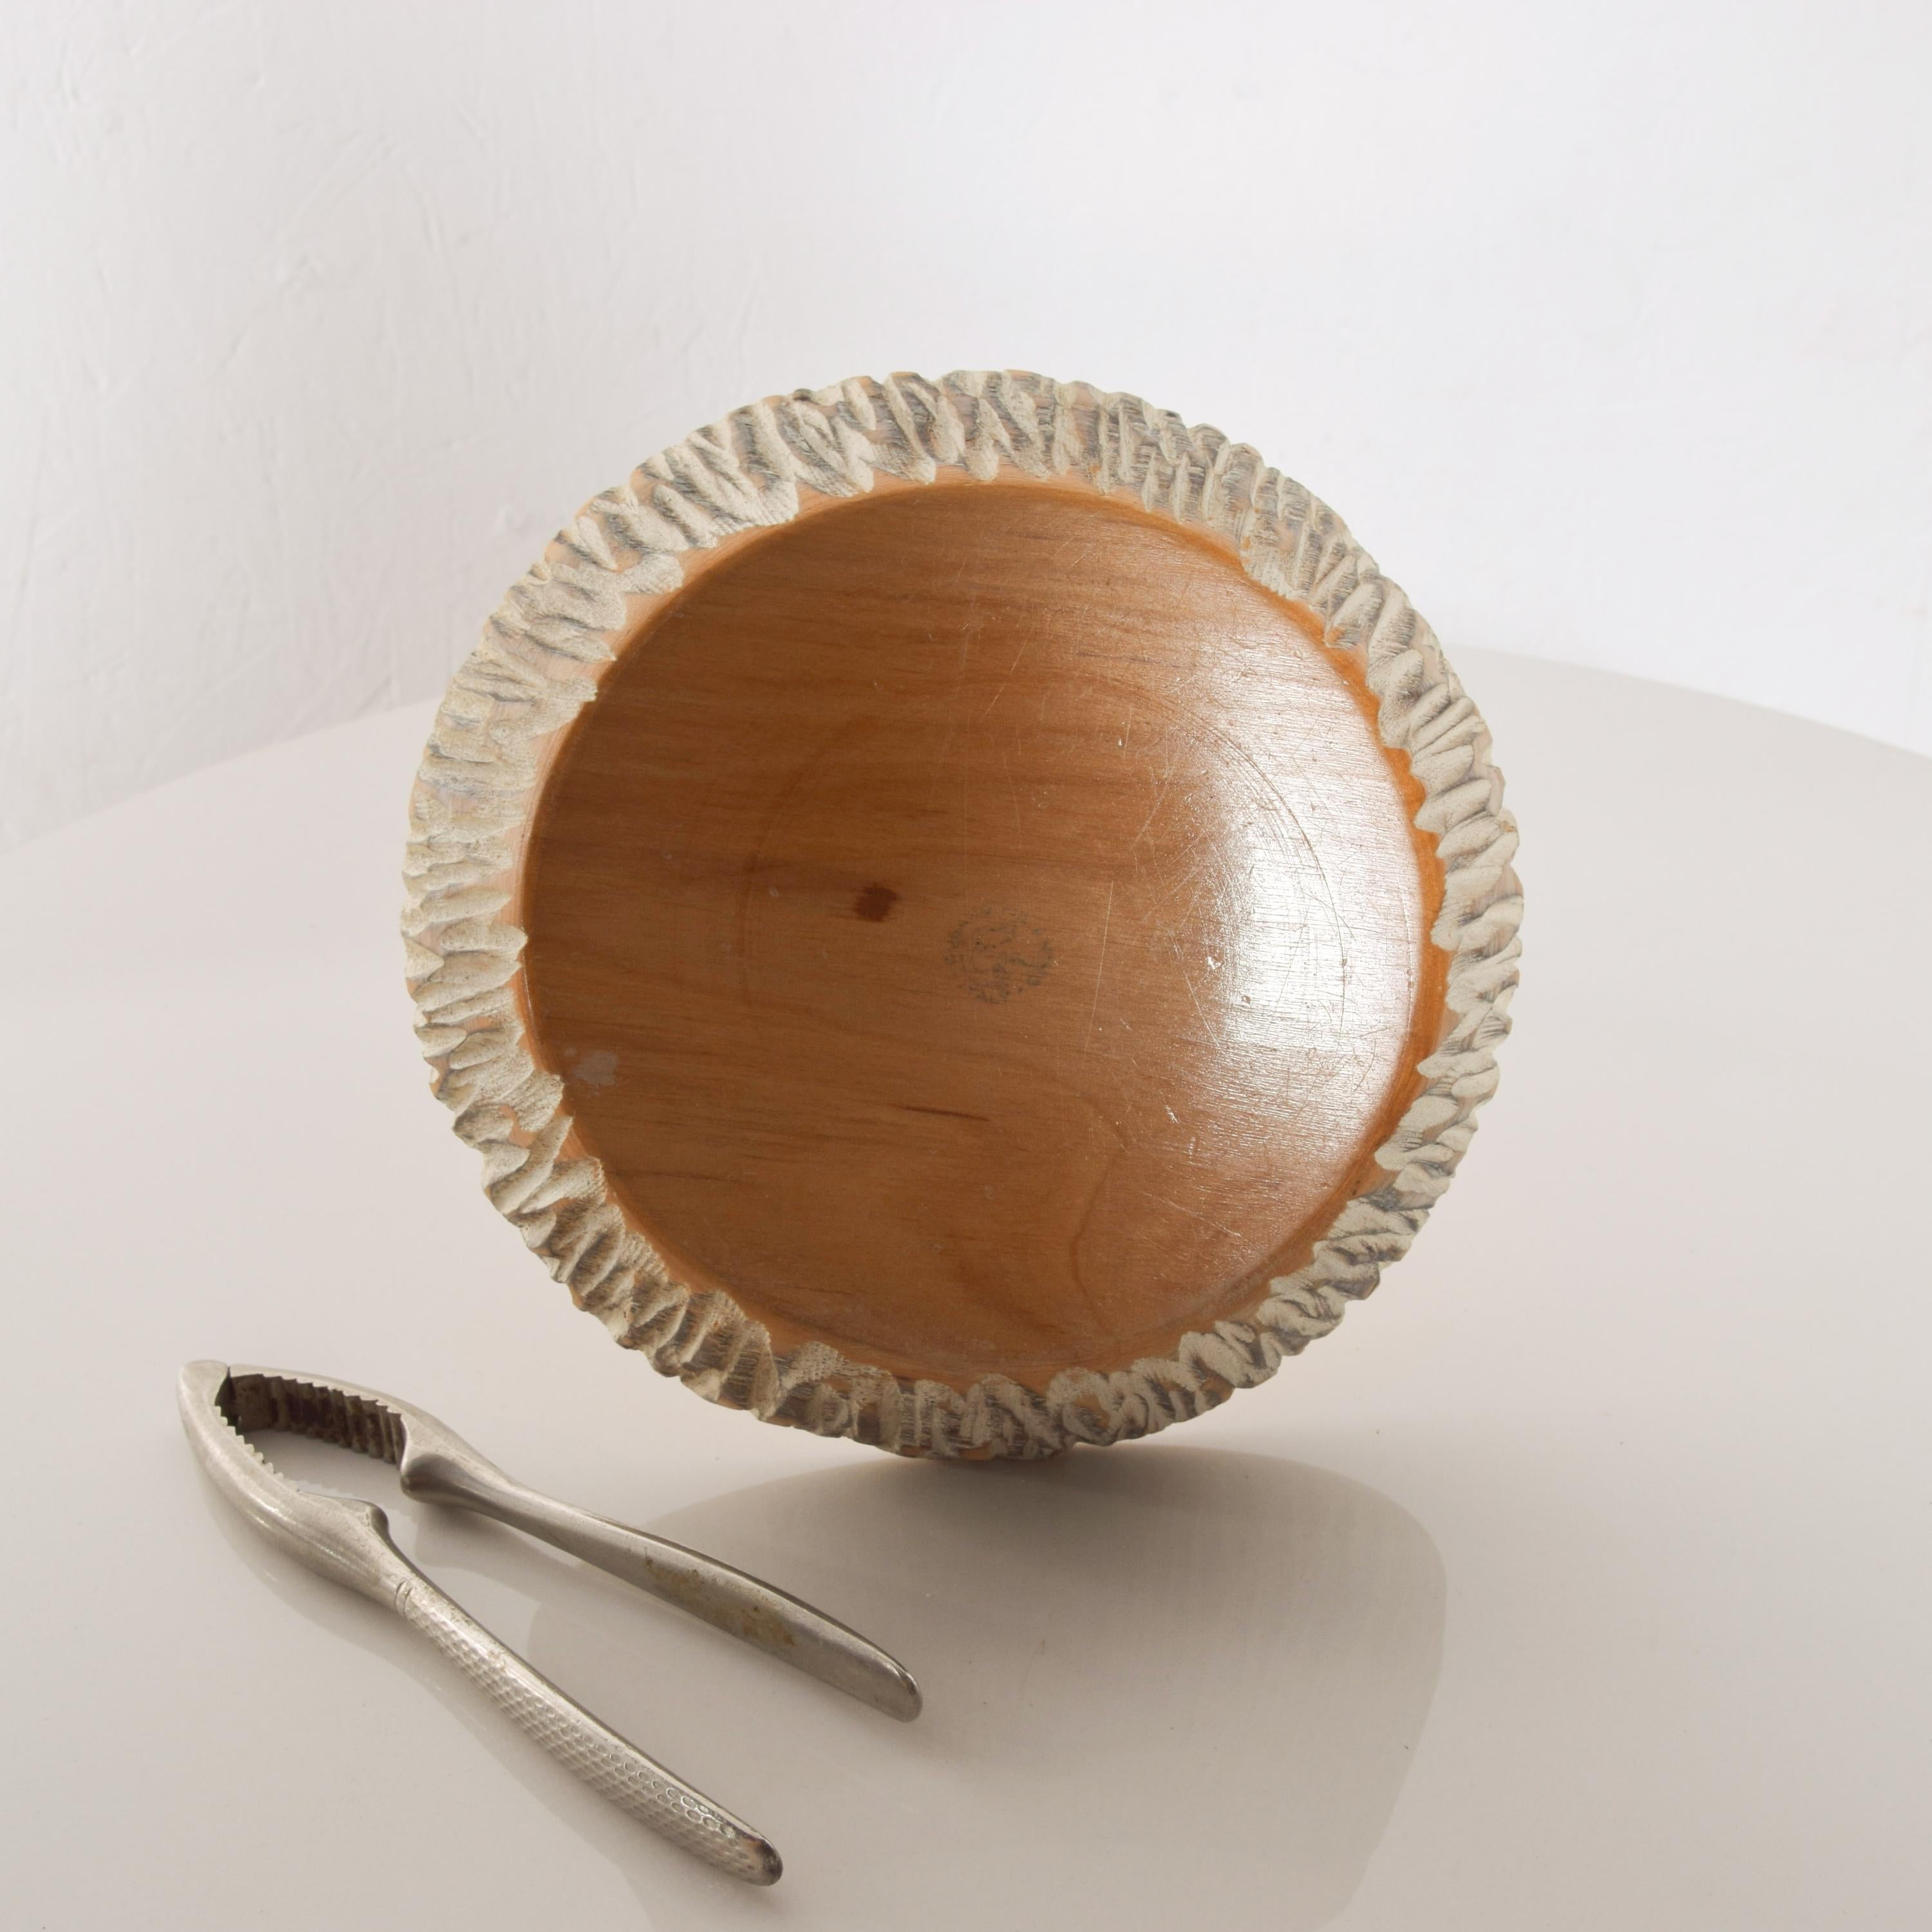 Aldo Tura Macabo Sculptural Wood Nutcracker Dish with Stainless Tool 1960s Italy 3